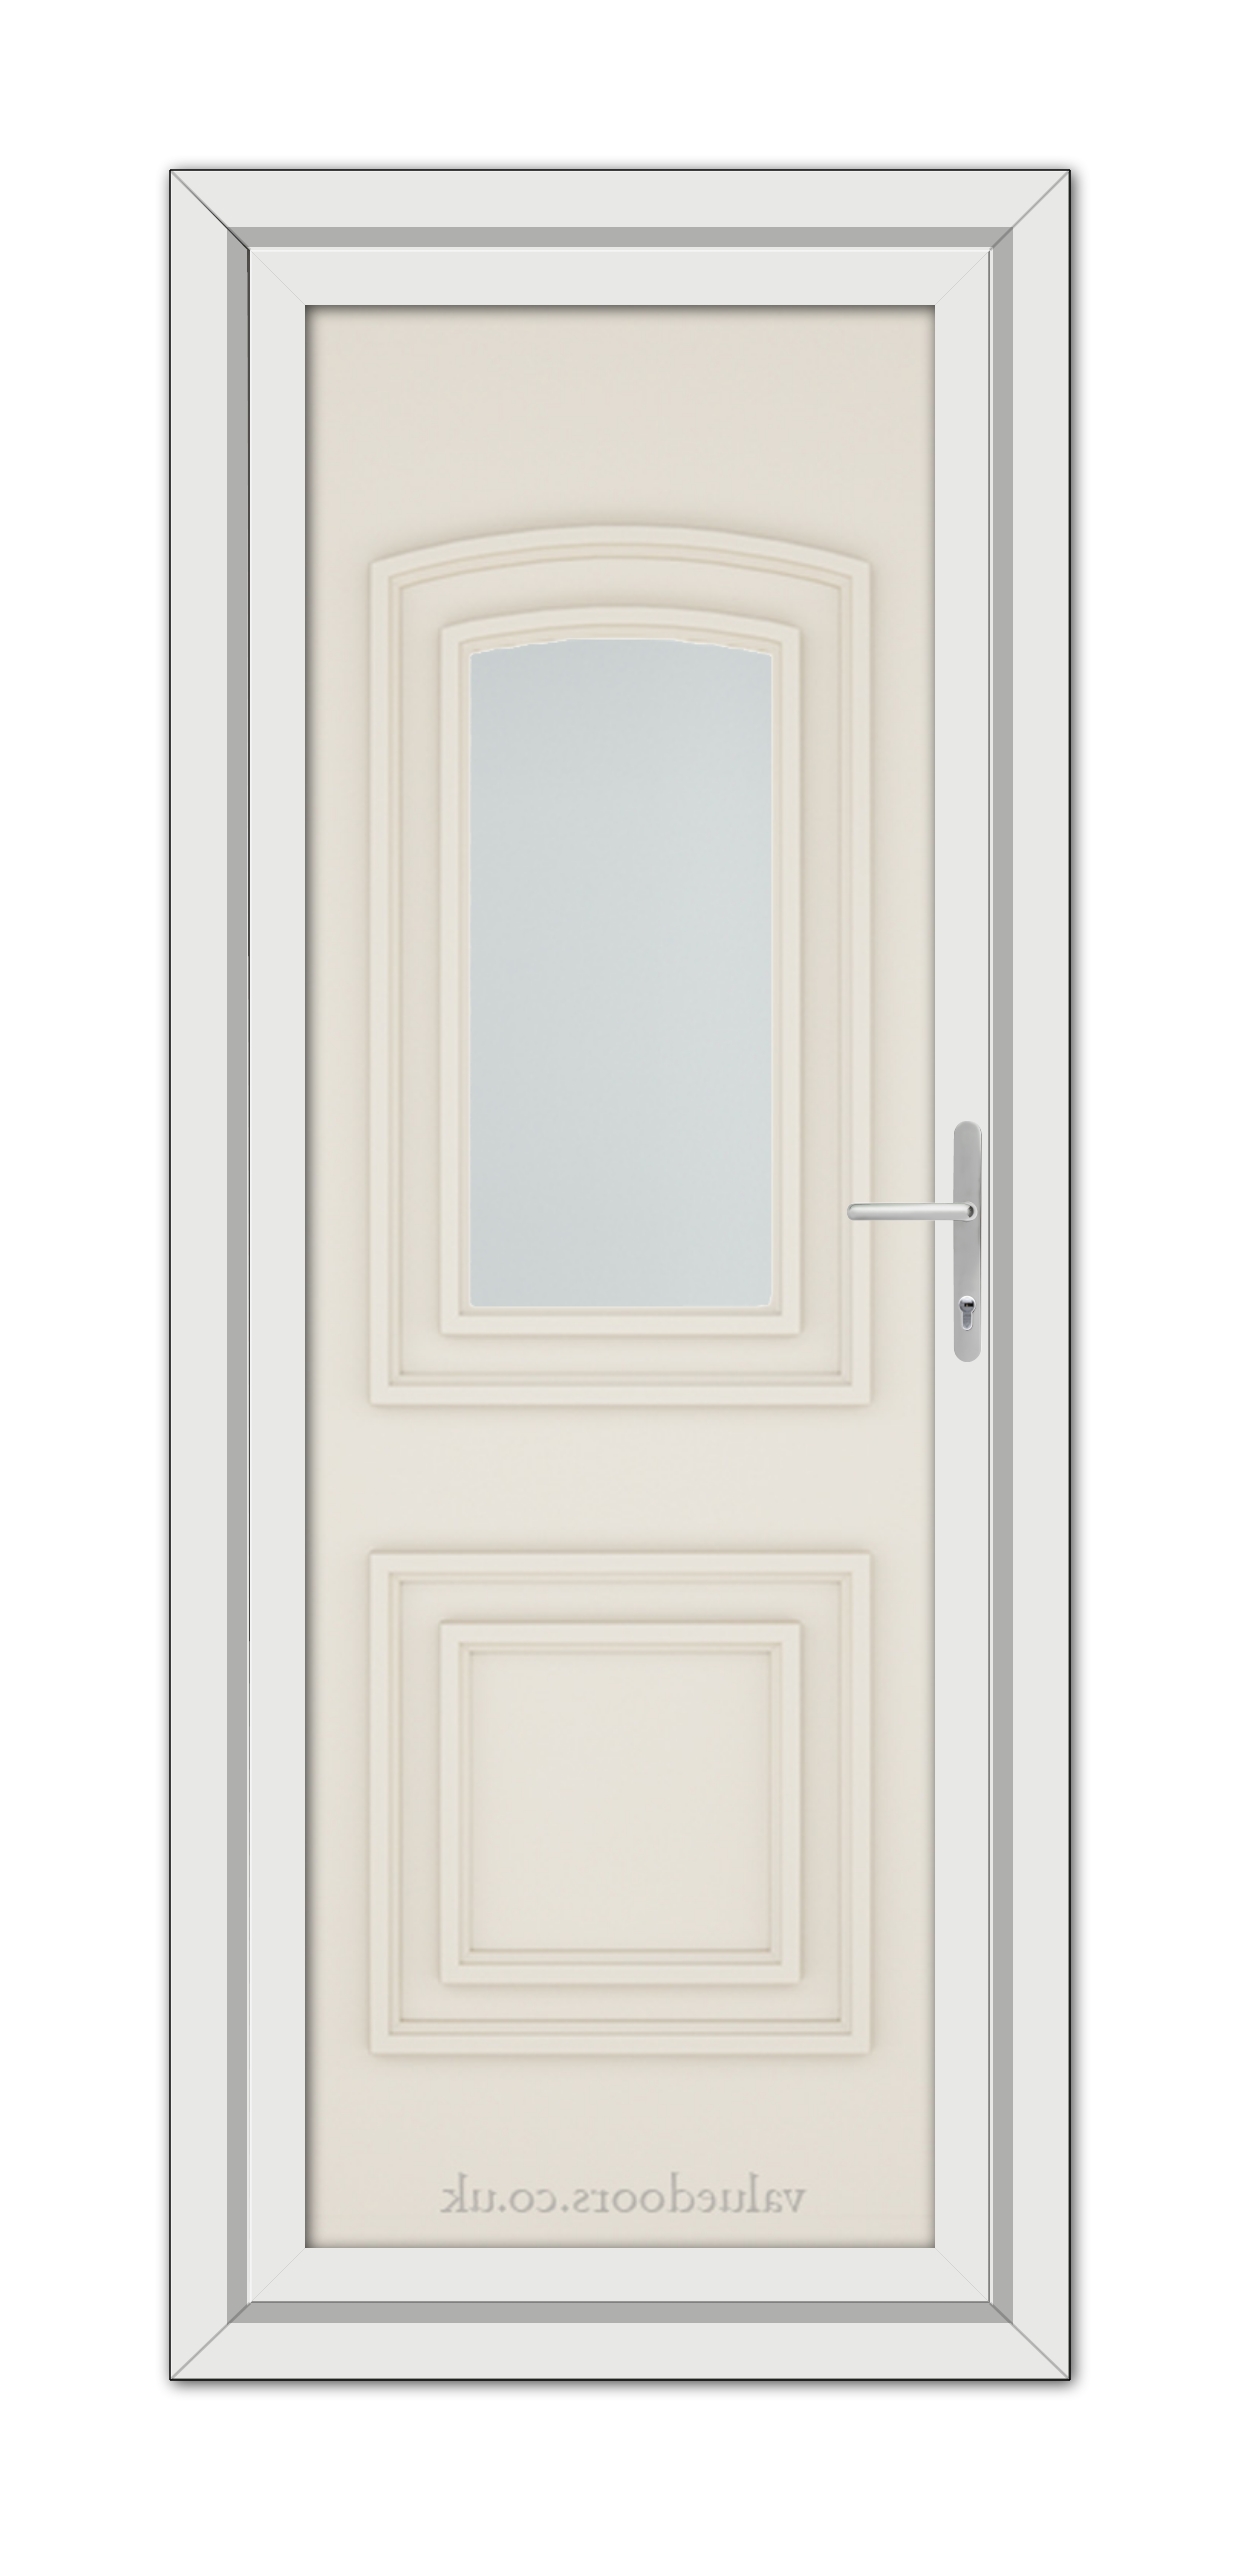 A vertical image of a closed, Cream Balmoral One uPVC Door with a rectangular frosted glass window, set in a white frame, viewed from the front.